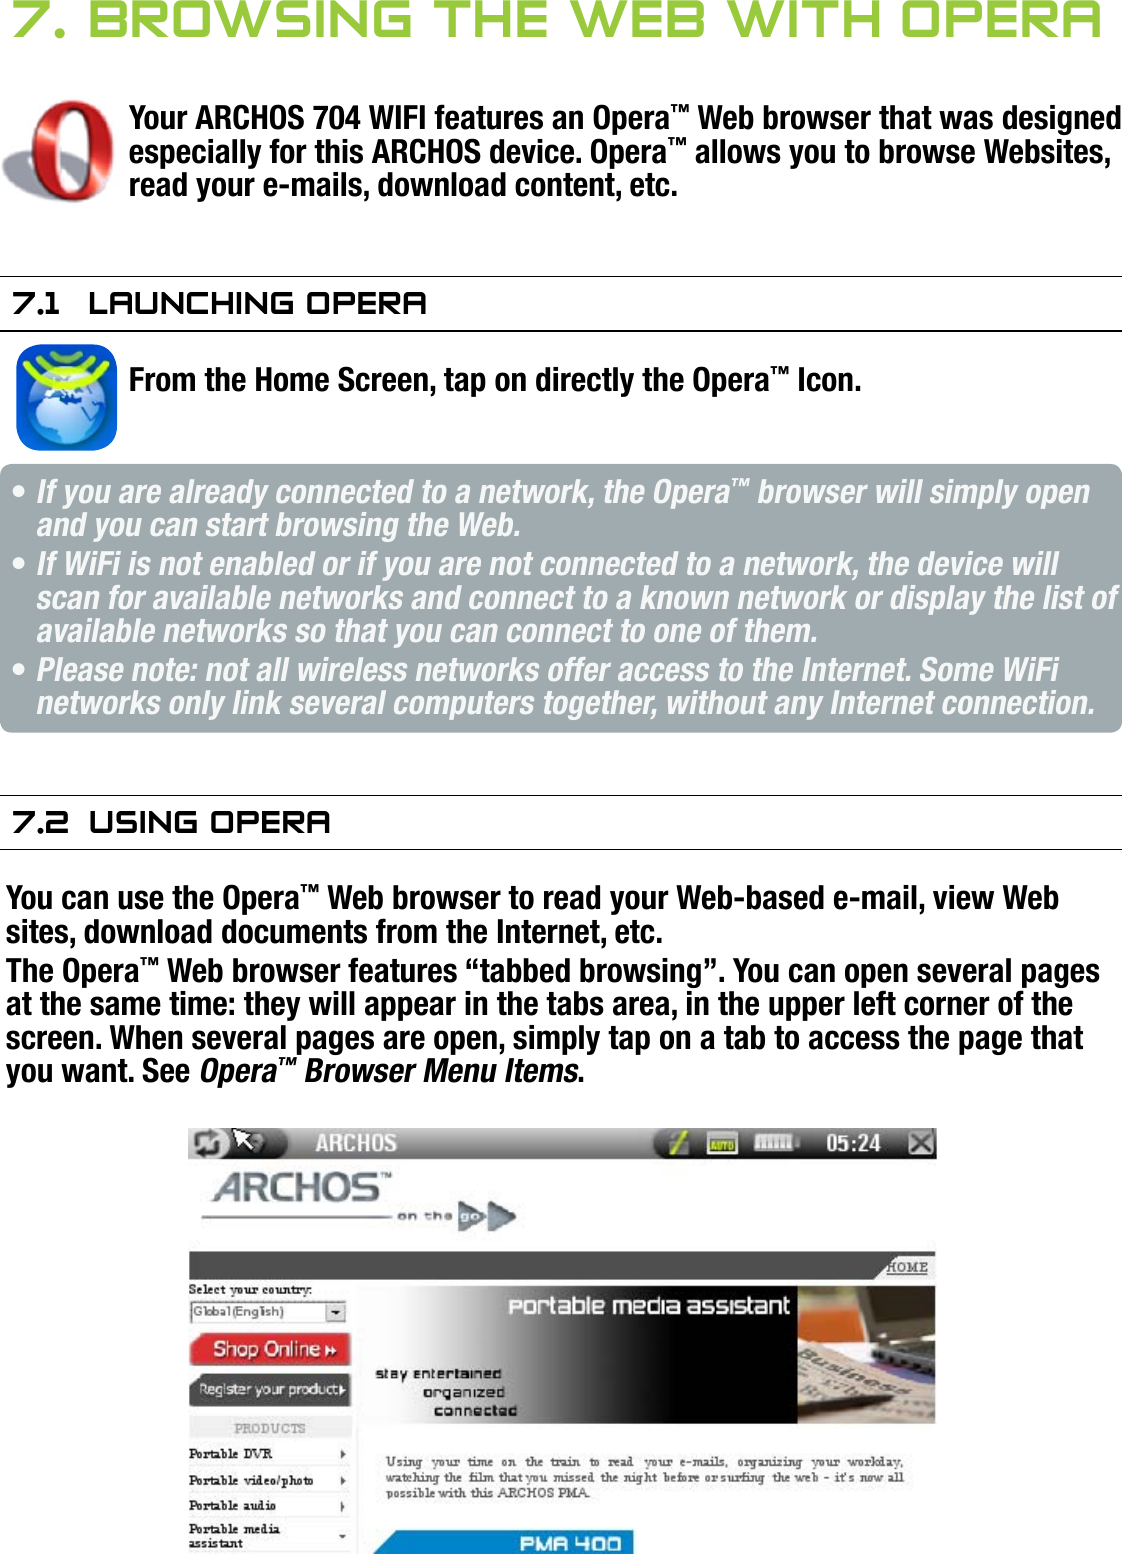 704MANUAL V0.0BROWSING THE WEB WITH OPERA™   &gt;   p. 417. brOwsing The web wiTh OPeraYour ARCHOS 704 WIFI features an Opera™ Web browser that was designed especially for this ARCHOS device. Opera™ allows you to browse Websites, read your e-mails, download content, etc.7.1  launChing OPeraFrom the Home Screen, tap on directly the Opera™ Icon. If you are already connected to a network, the Opera™ browser will simply open and you can start browsing the Web.If WiFi is not enabled or if you are not connected to a network, the device will scan for available networks and connect to a known network or display the list of available networks so that you can connect to one of them.Please note: not all wireless networks offer access to the Internet. Some WiFi networks only link several computers together, without any Internet connection.7.2  using OPeraYou can use the Opera™ Web browser to read your Web-based e-mail, view Web sites, download documents from the Internet, etc.The Opera™ Web browser features “tabbed browsing”. You can open several pages at the same time: they will appear in the tabs area, in the upper left corner of the screen. When several pages are open, simply tap on a tab to access the page that you want. See Opera™ Browser Menu Items.•••